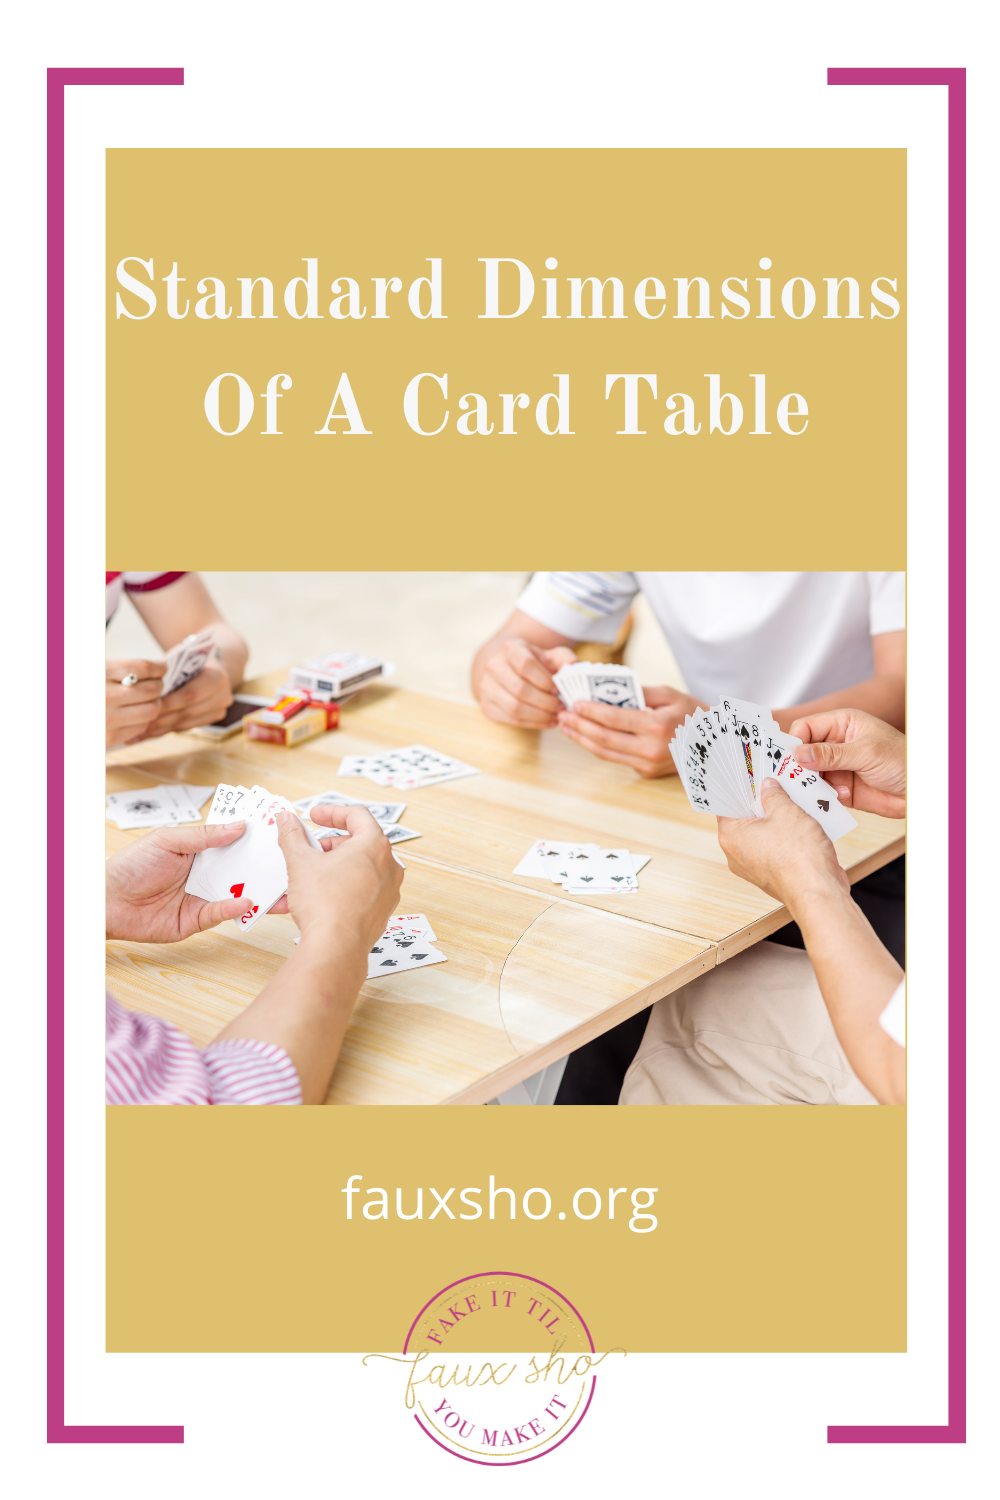 Fauxsho.com will fill you in on all the info you've been missing. Find hacks, ideas, and life tips that will help you get by a little more smoothly. Check out these standard dimensions for a card table, whether you're planning to build one or just planning your living room layout.